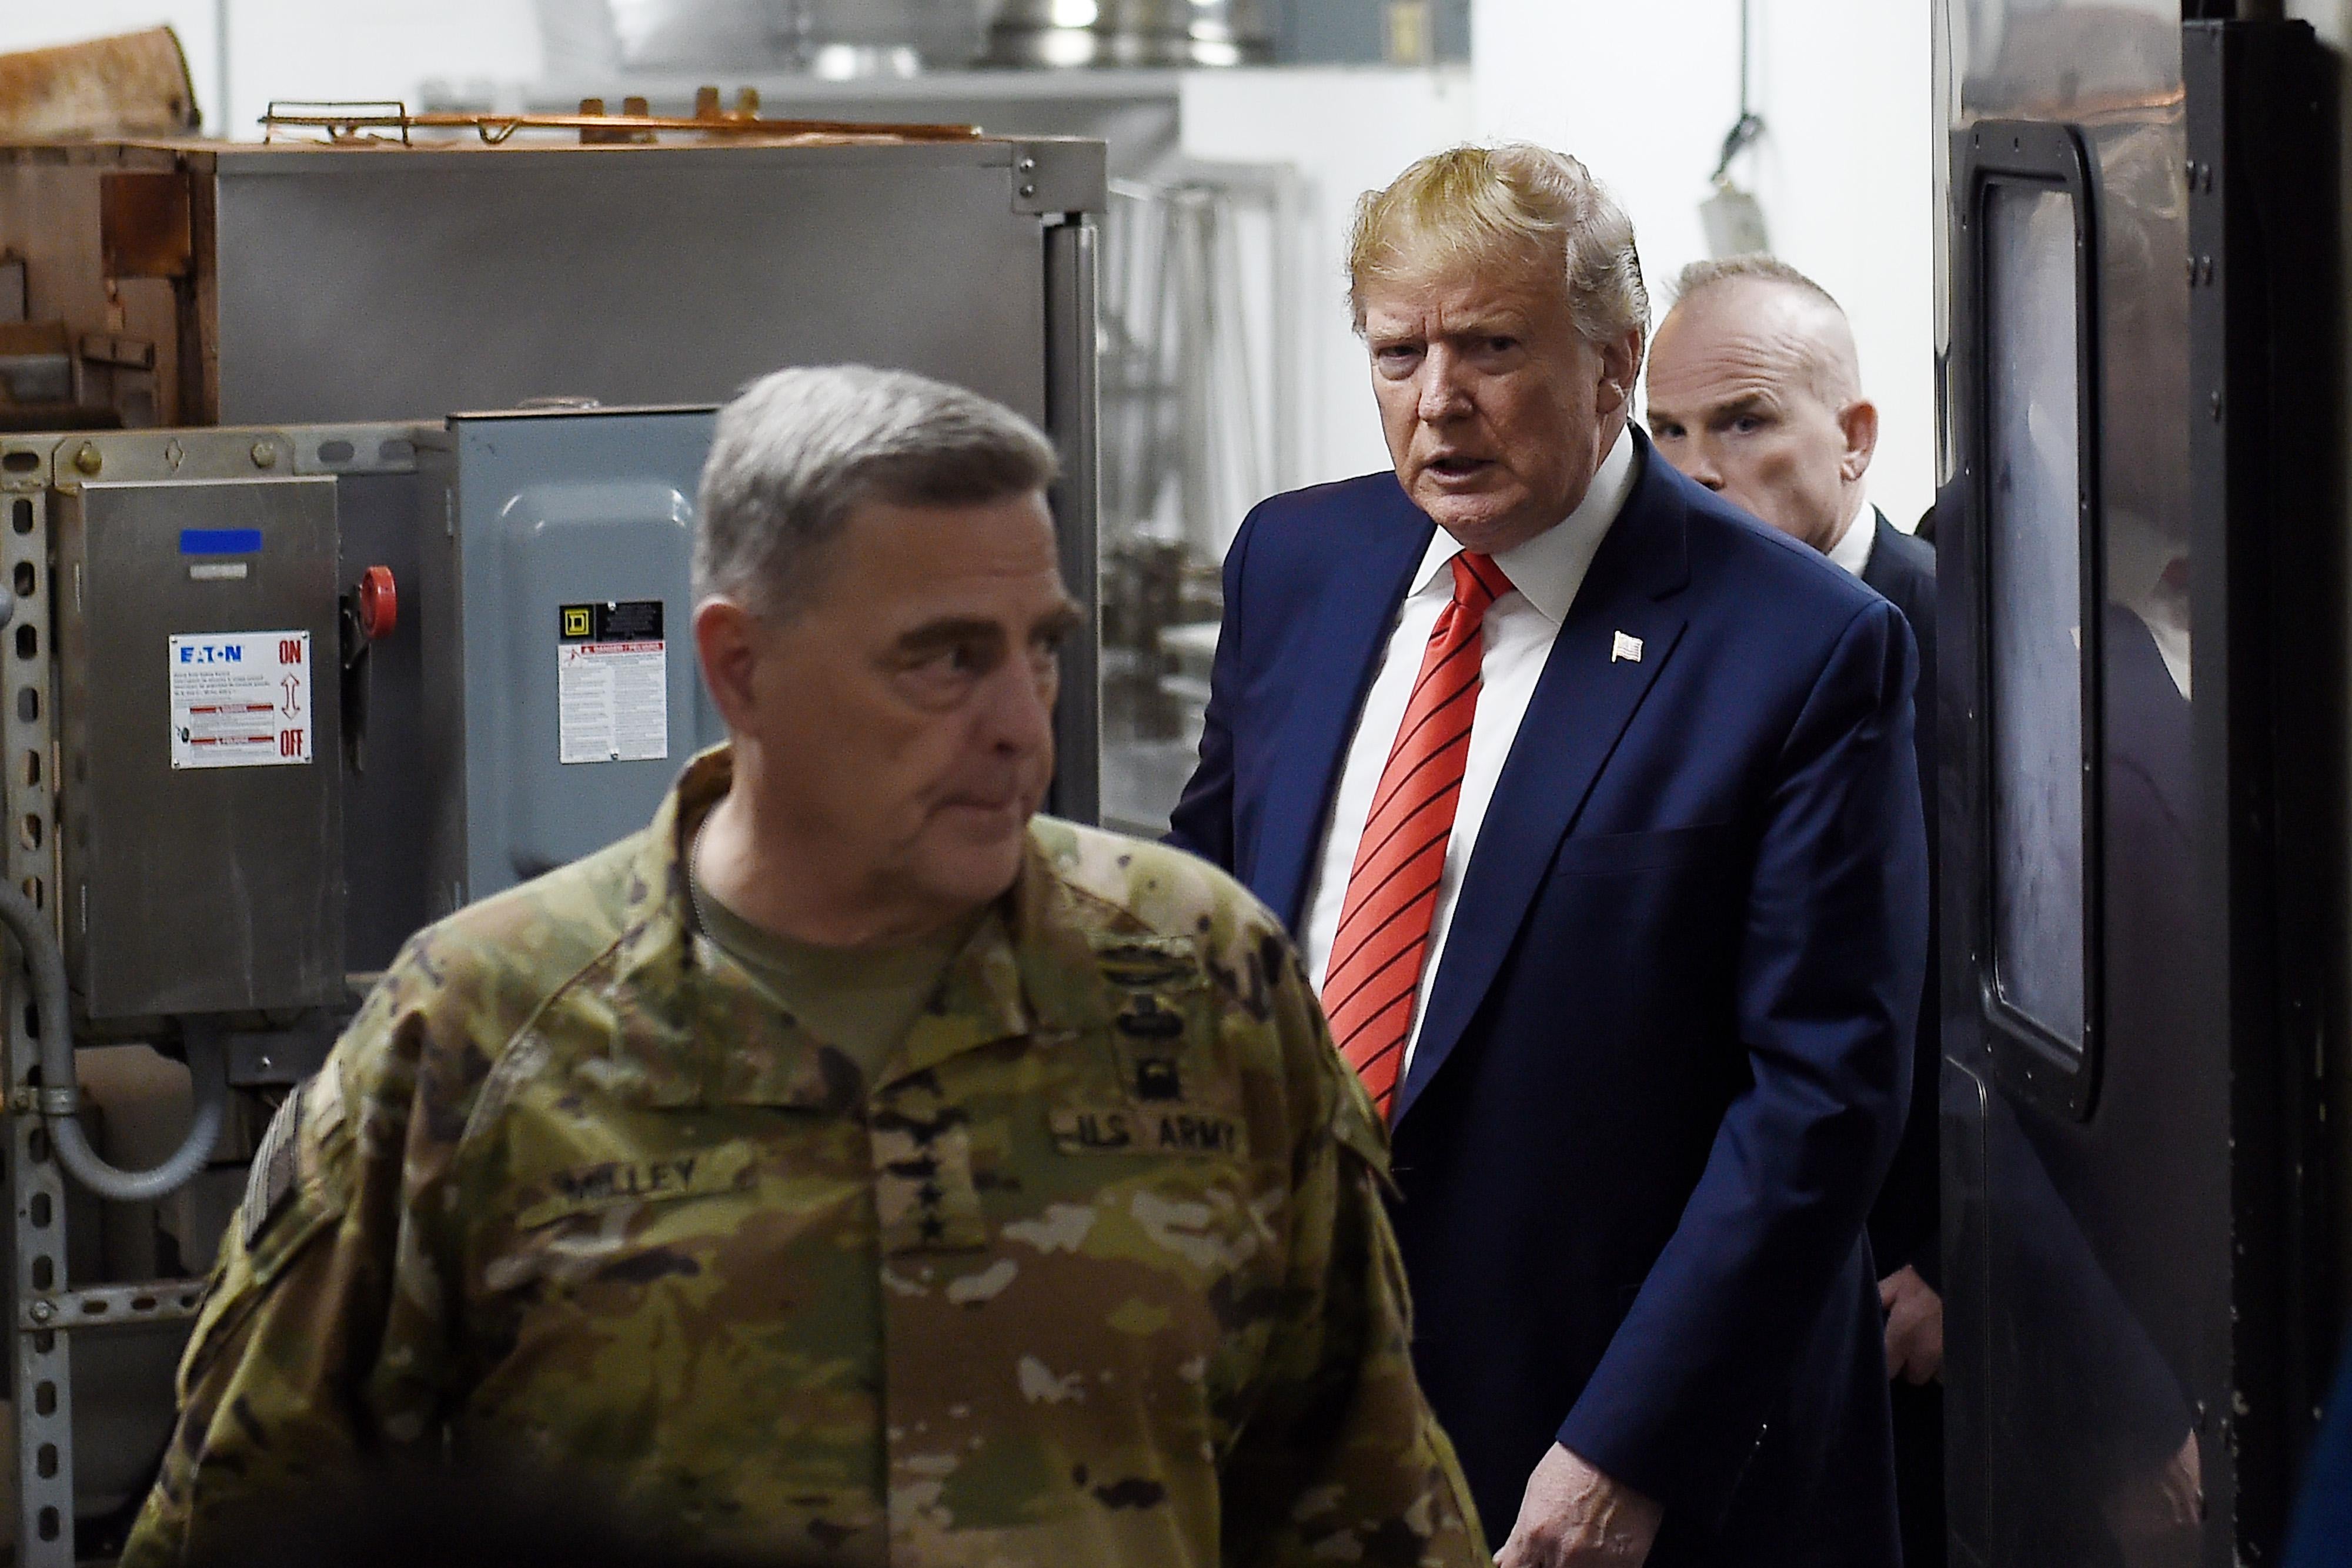 Mark Milley, wearing camo, stands in front of Donald Trump, who's in a suit. Another man can be seen behind Trump.